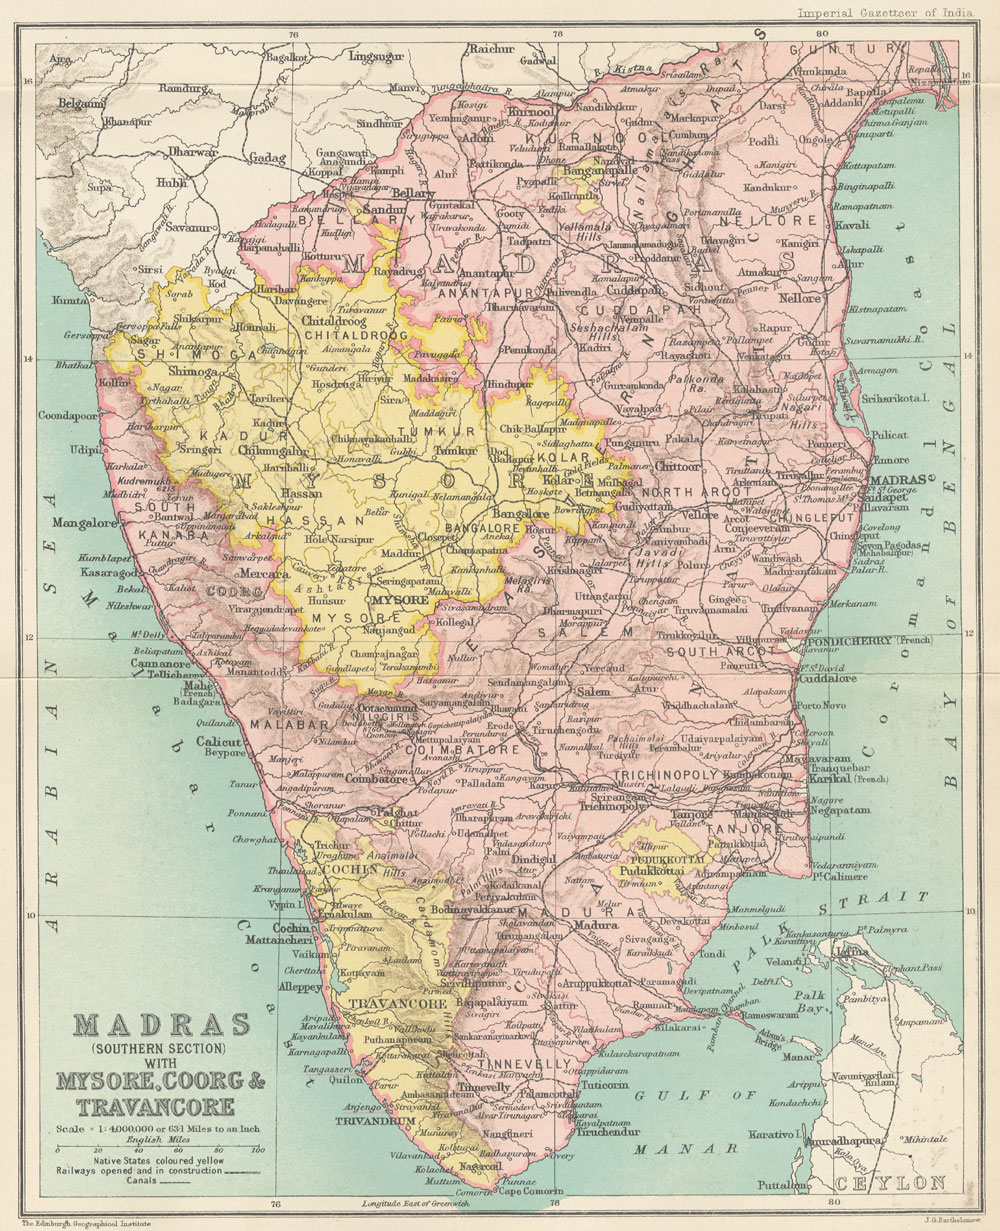 Madras_Southern_Section.jpg